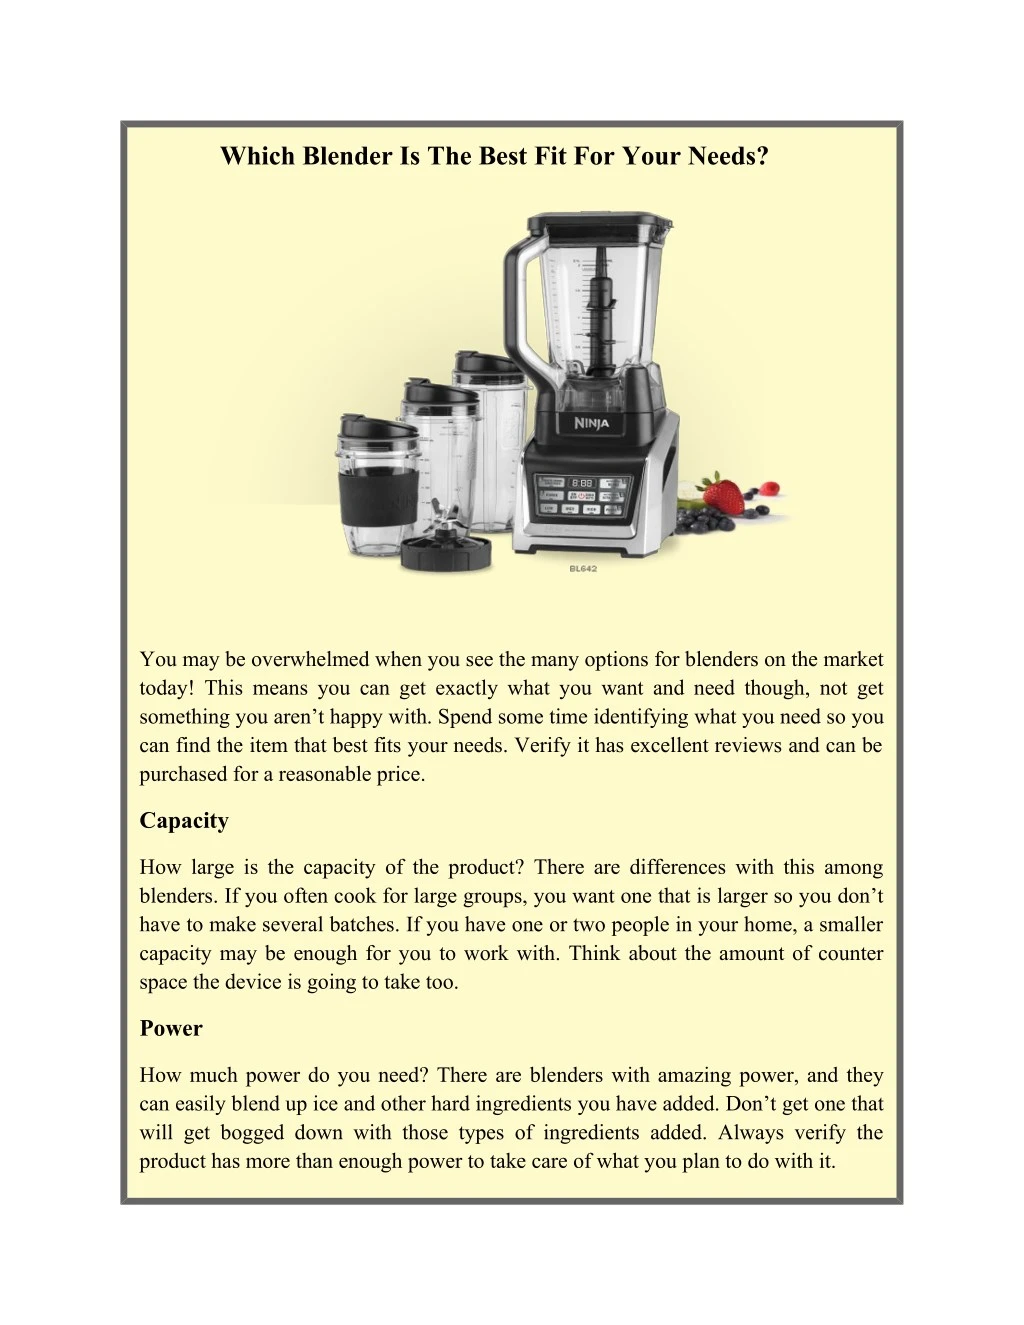 which blender is the best fit for your needs